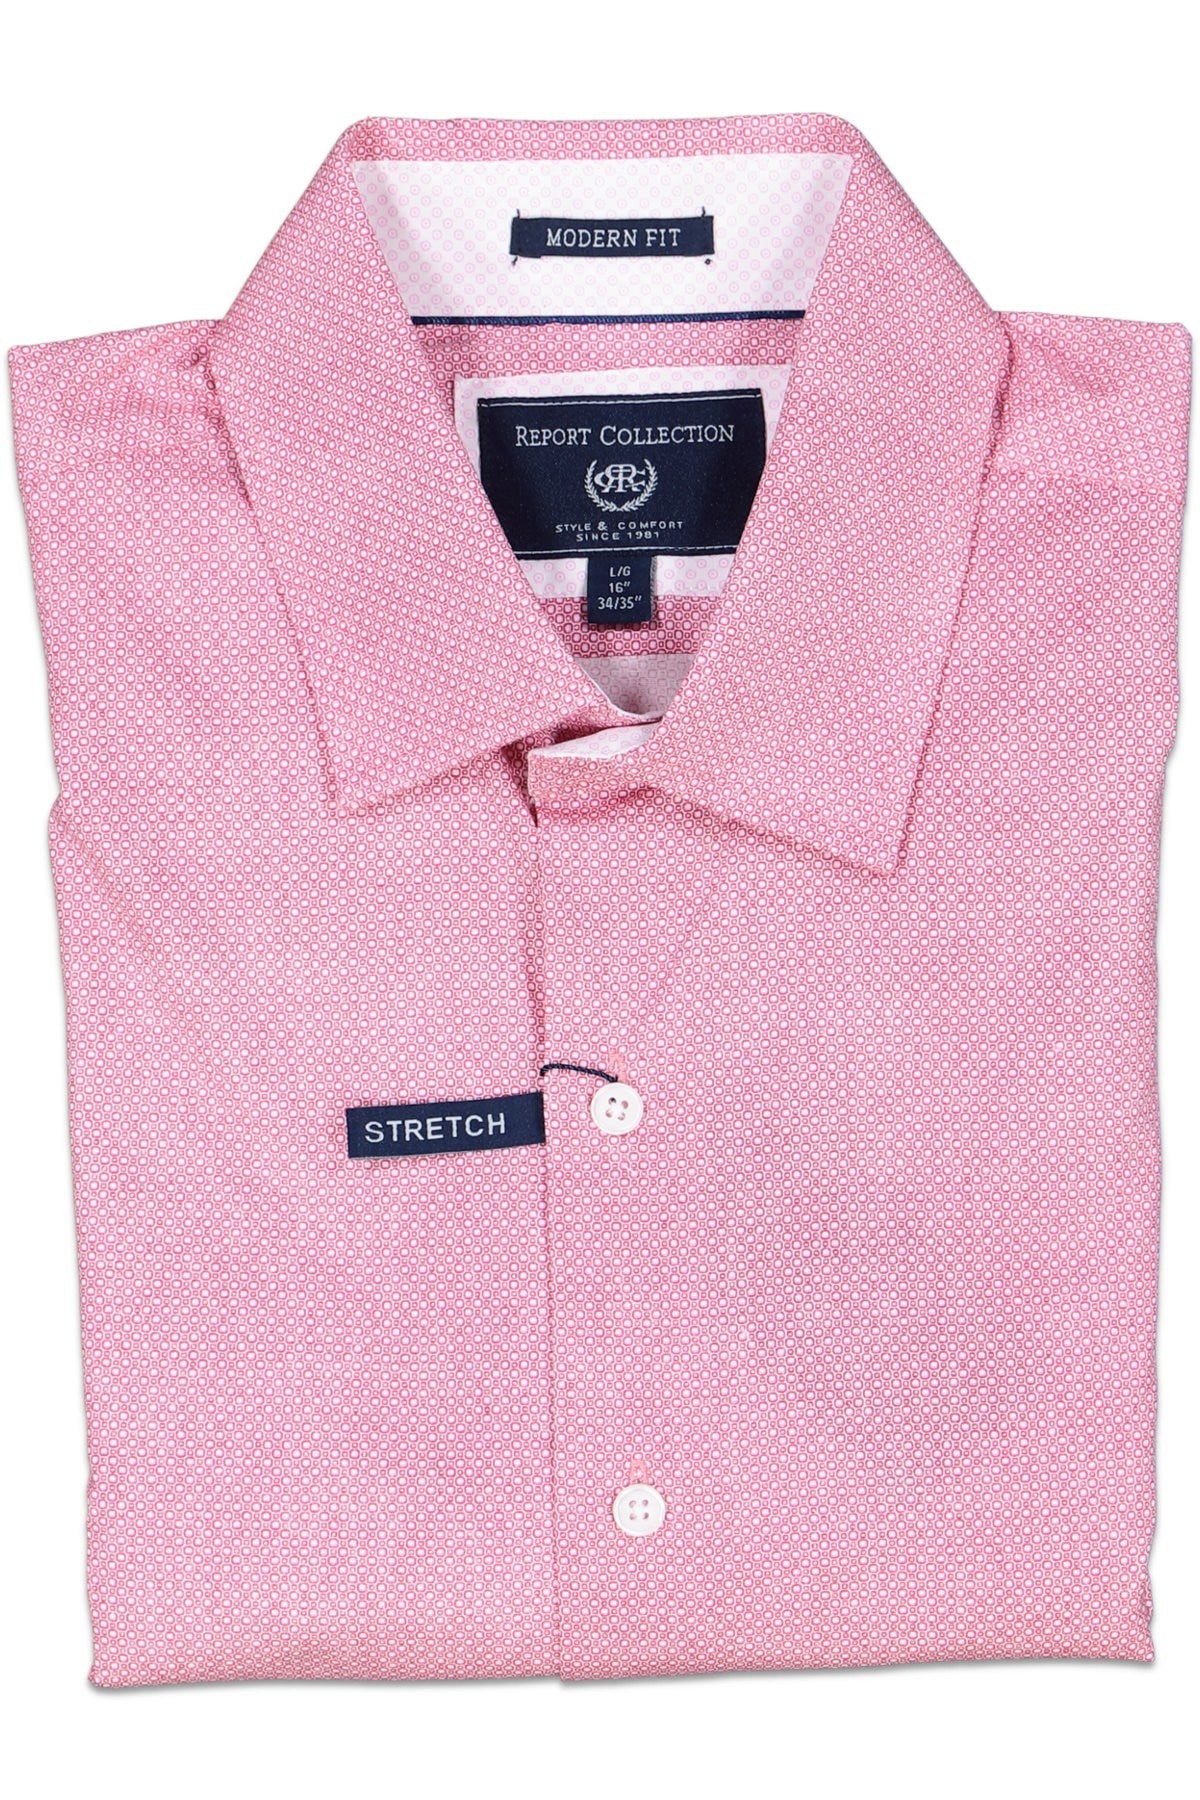 Report Collection Modern Fit Bubble Print Pink Dress Shirt